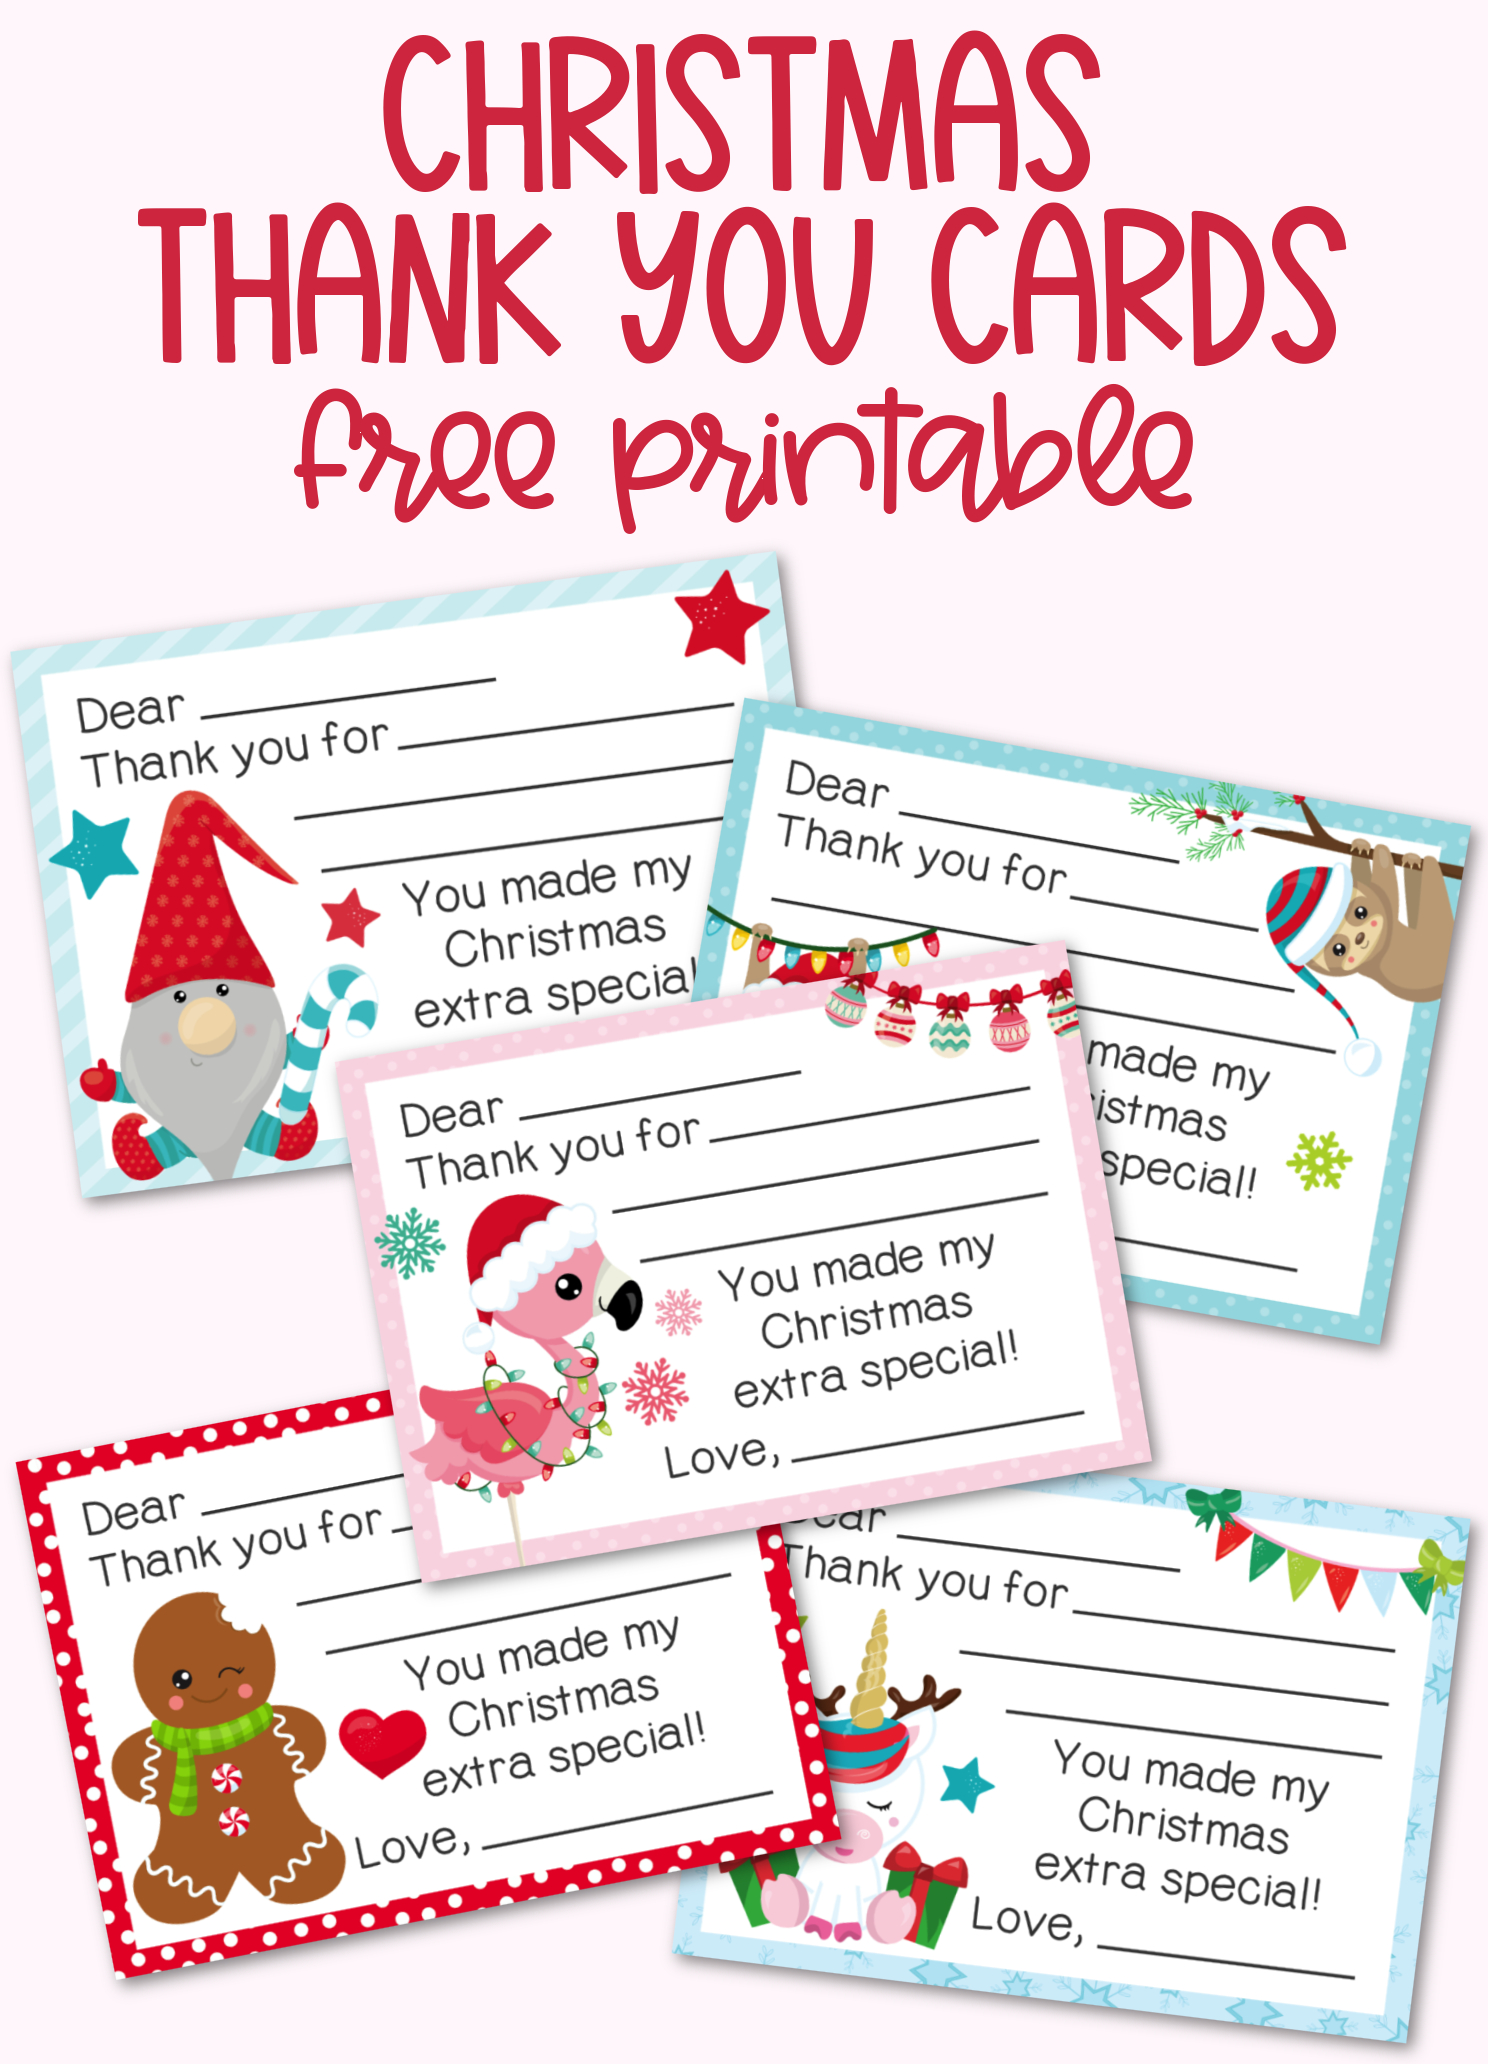 Fill-In-The-Blank Christmas Thank You Cards Free Printable for Free Christmas Thank You Notes Printable